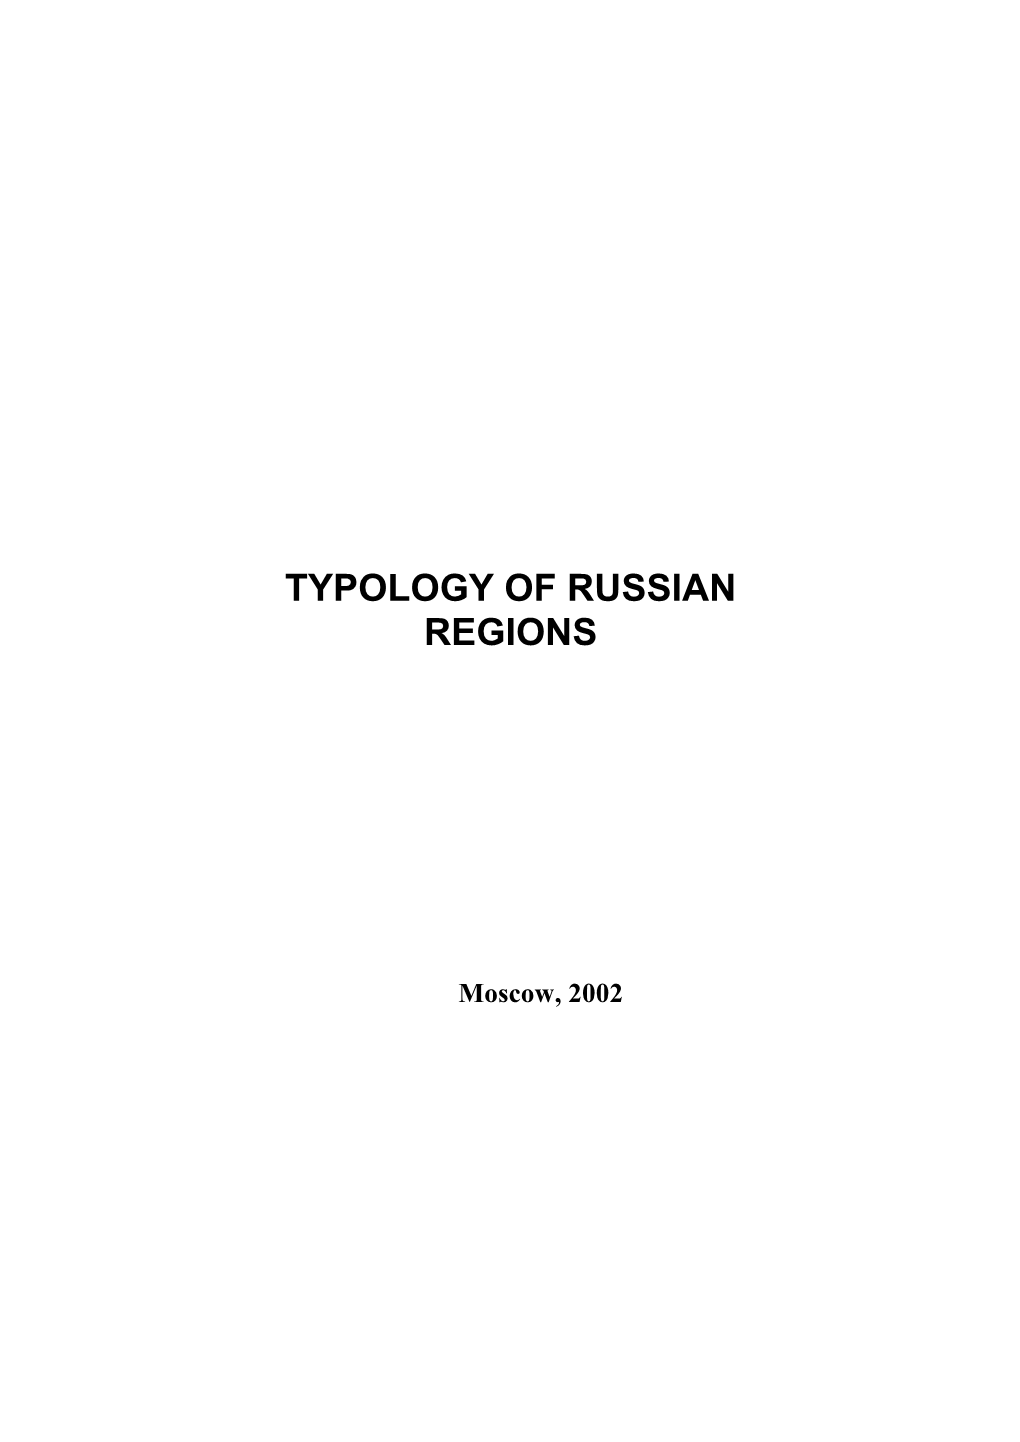 Typology of Russian Regions